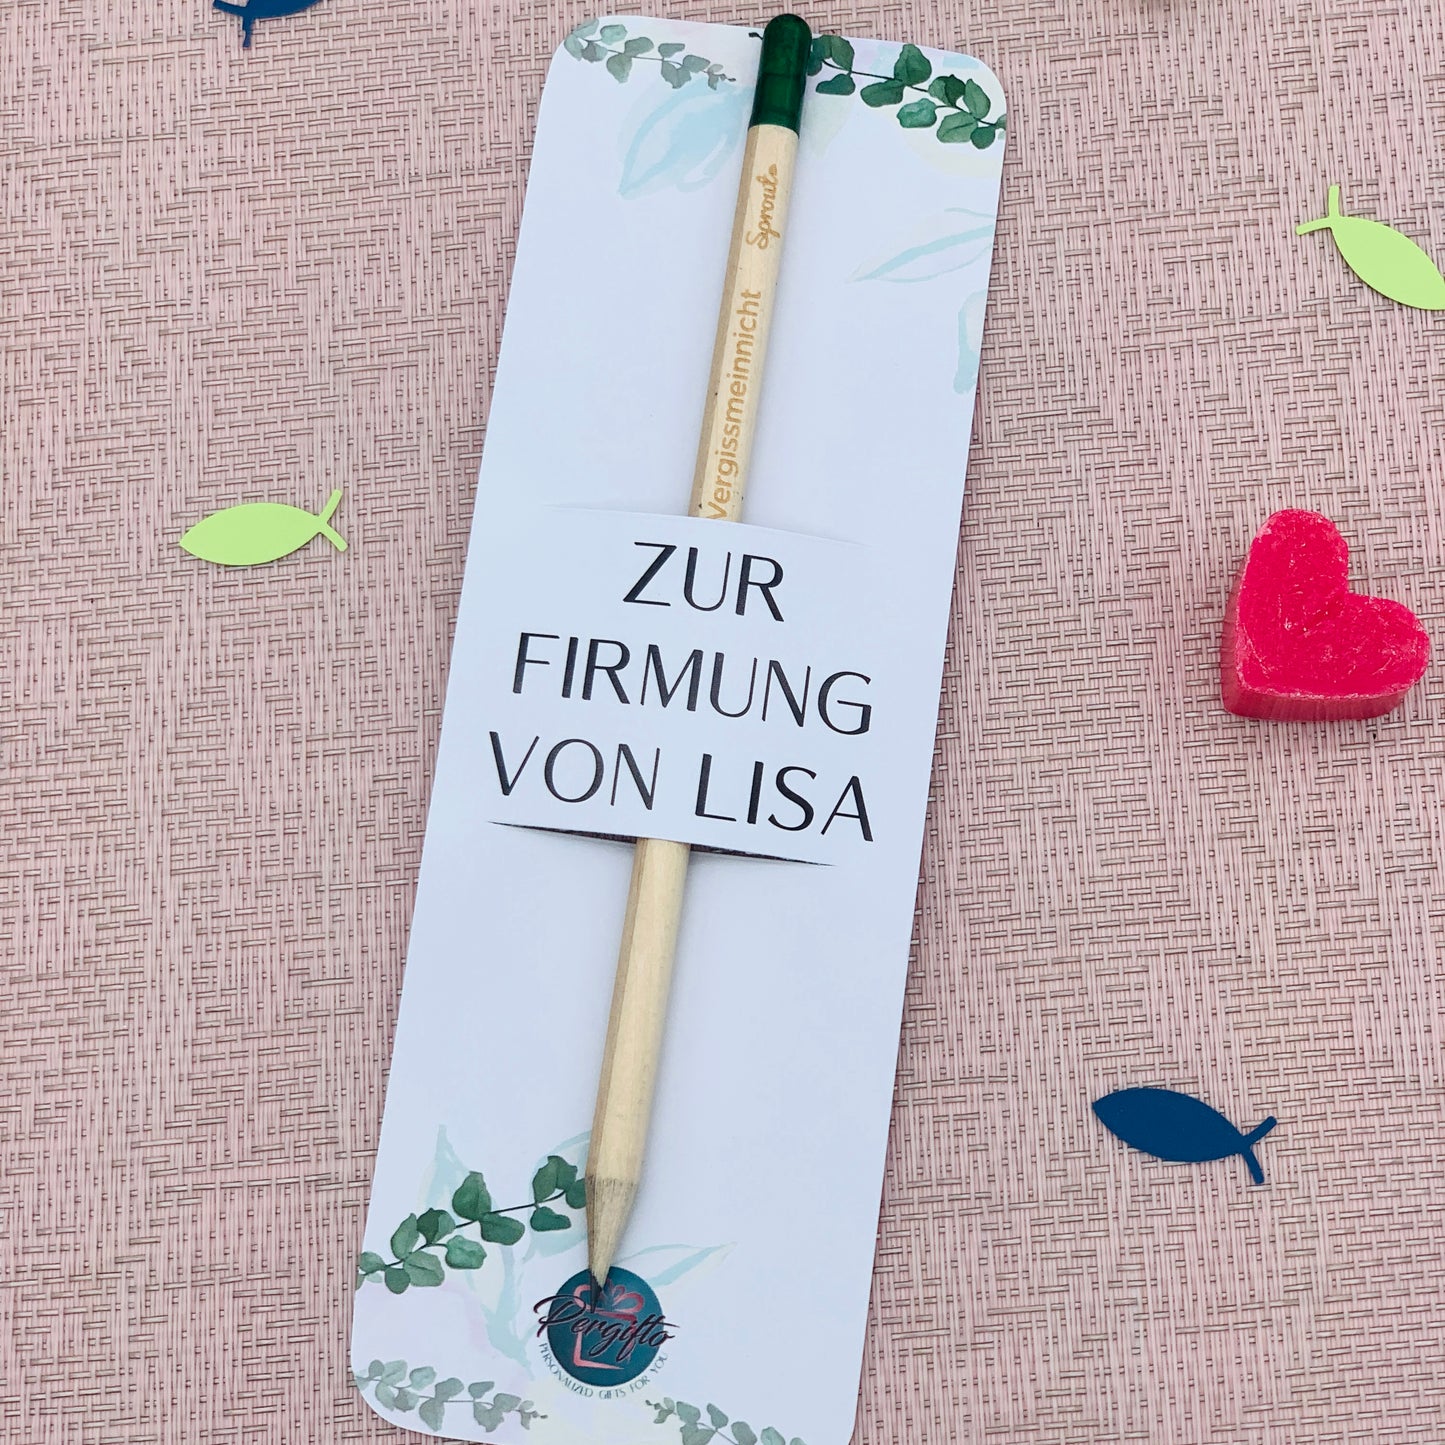 Pencil for planting with personalized card - guest gift baptism, communion, confirmation - sustainable gift - pencil personalized with engraving